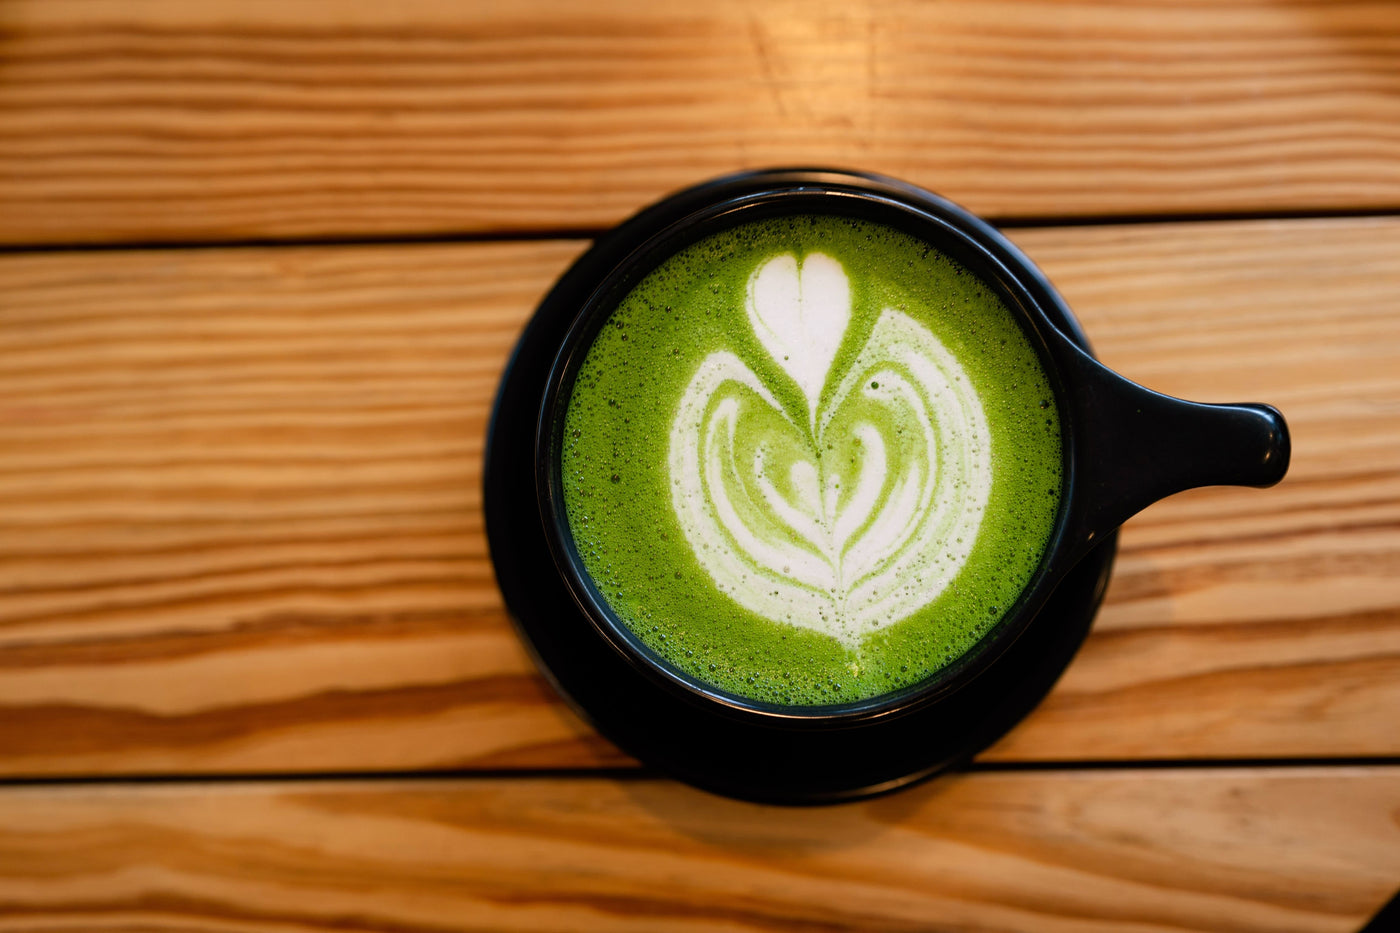 Does Matcha Have Caffeine and Should I Drink It?